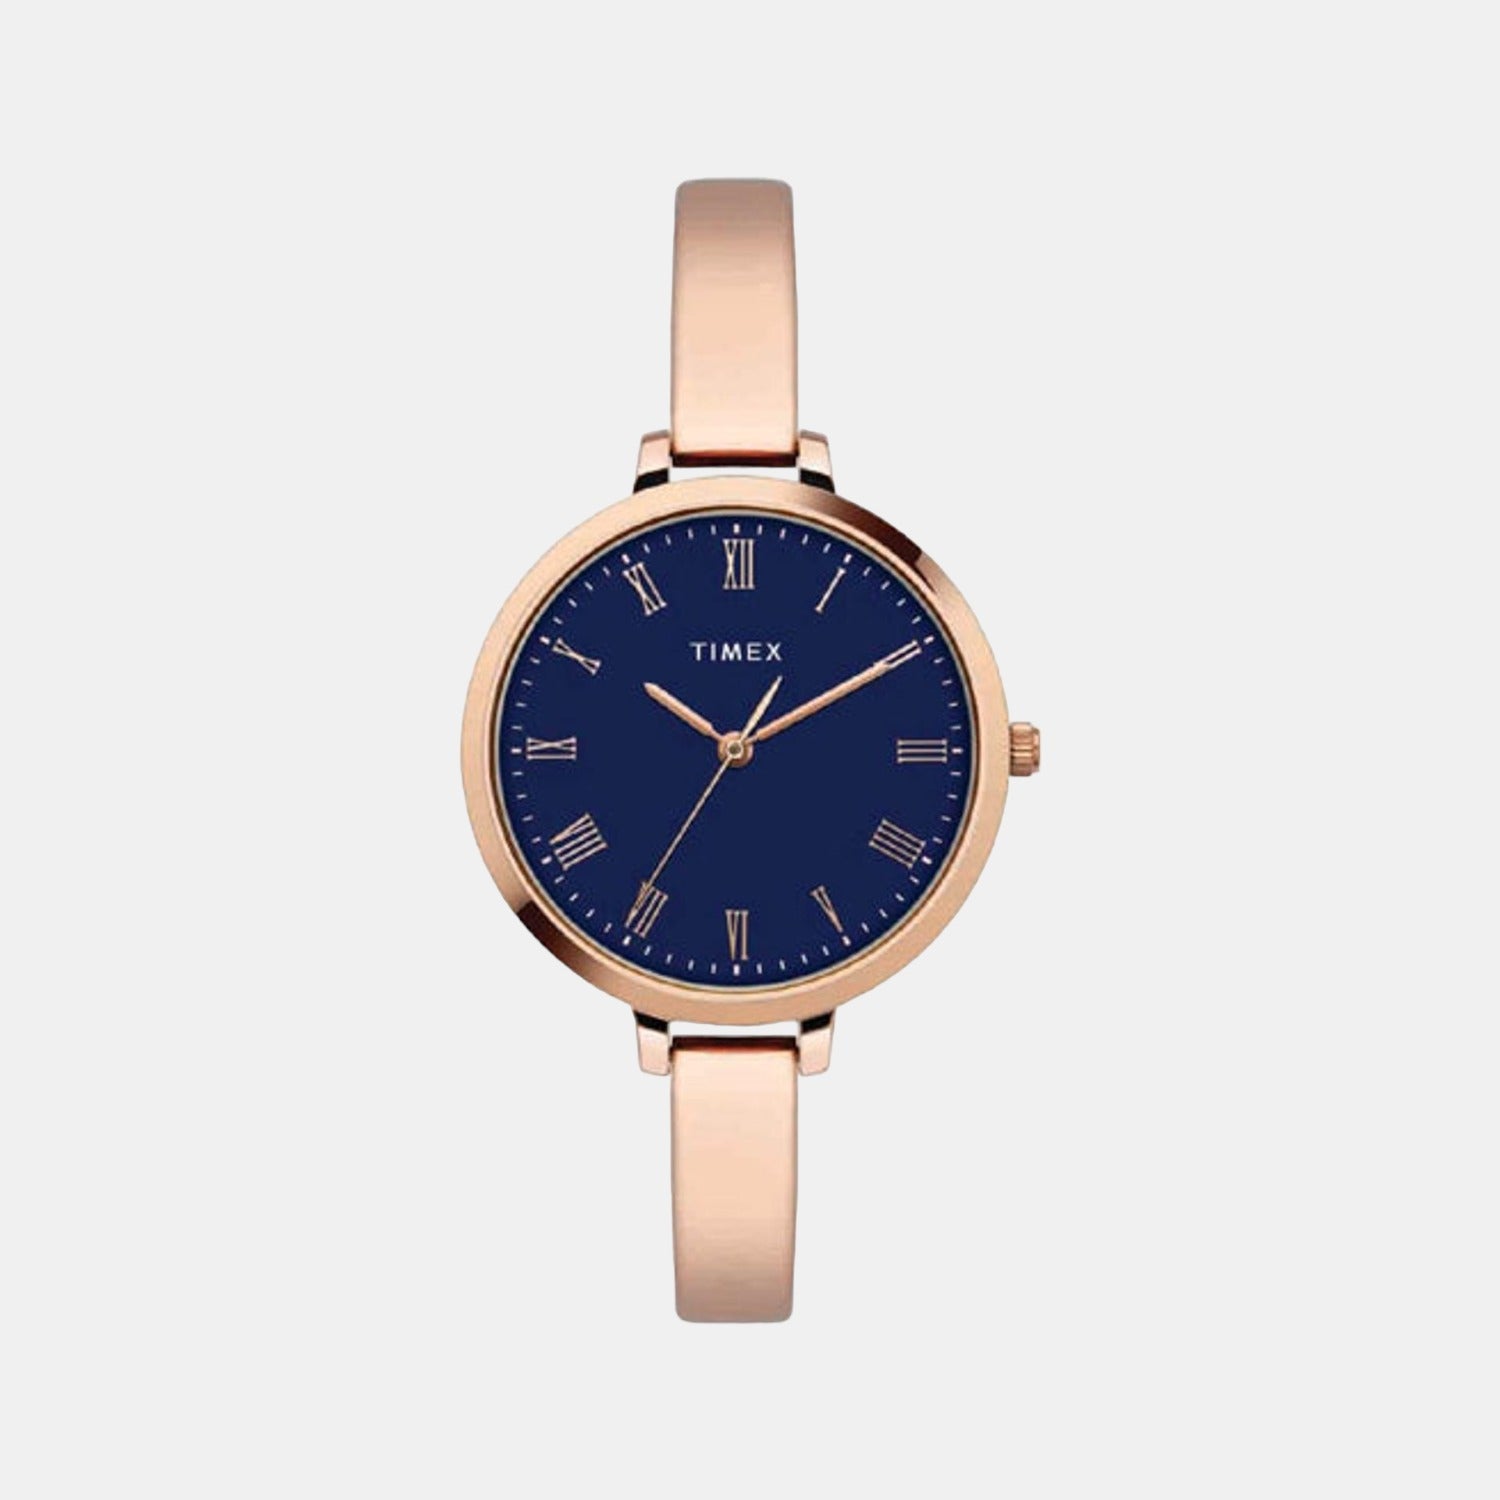 TIMEX Analog Blue Dial Men's Leather Watch-TW00ZR262E in Delhi at best  price by Johnson Watch Company Pvt Ltd - Justdial